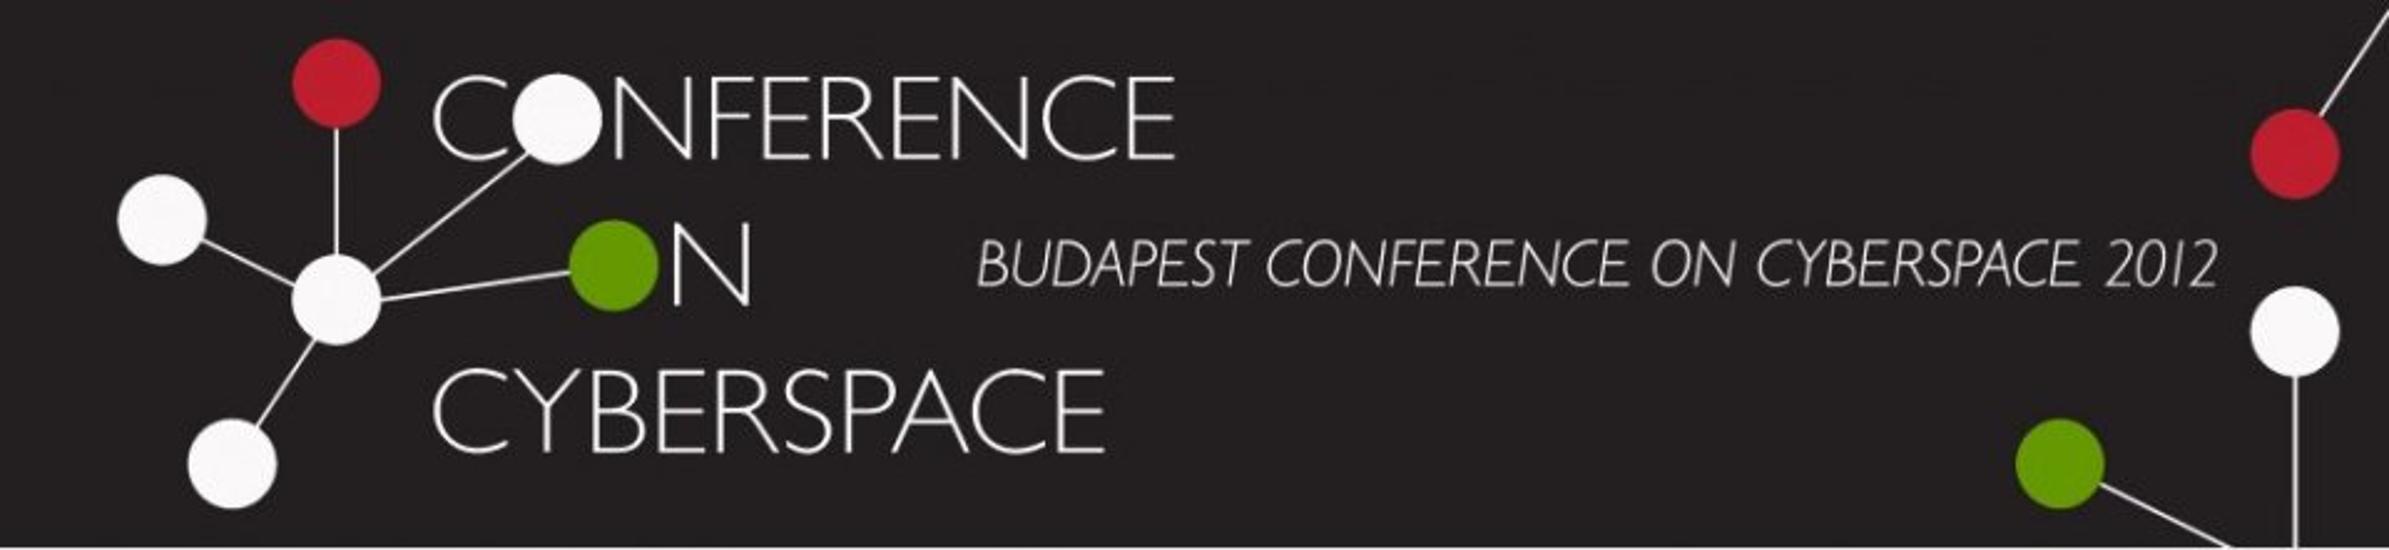 Budapest Conference On Cyberspace 2012